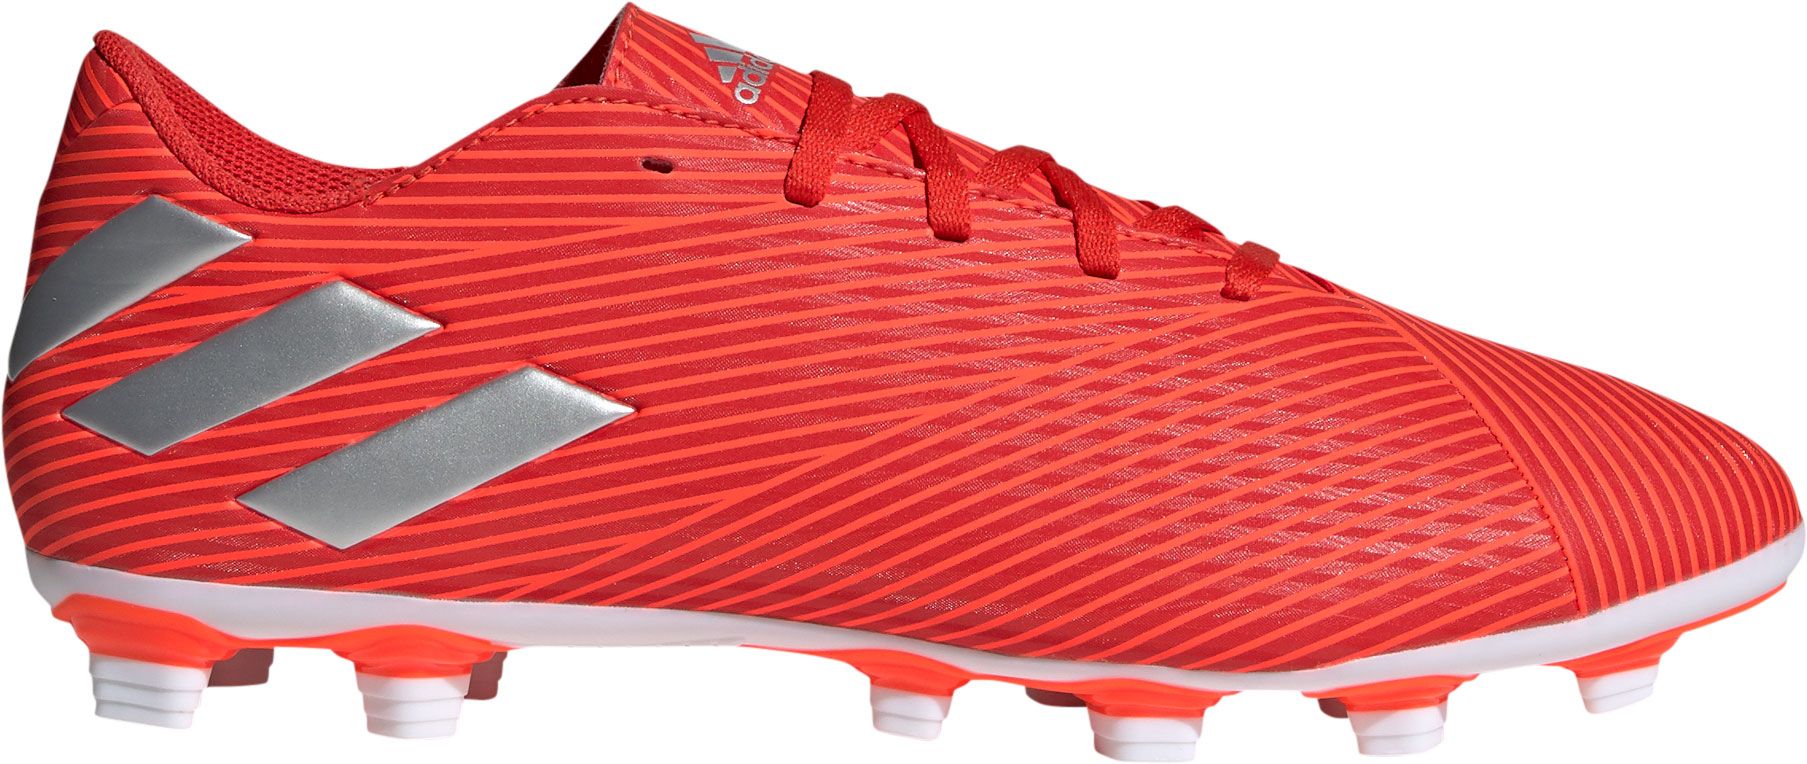 messi red cleats